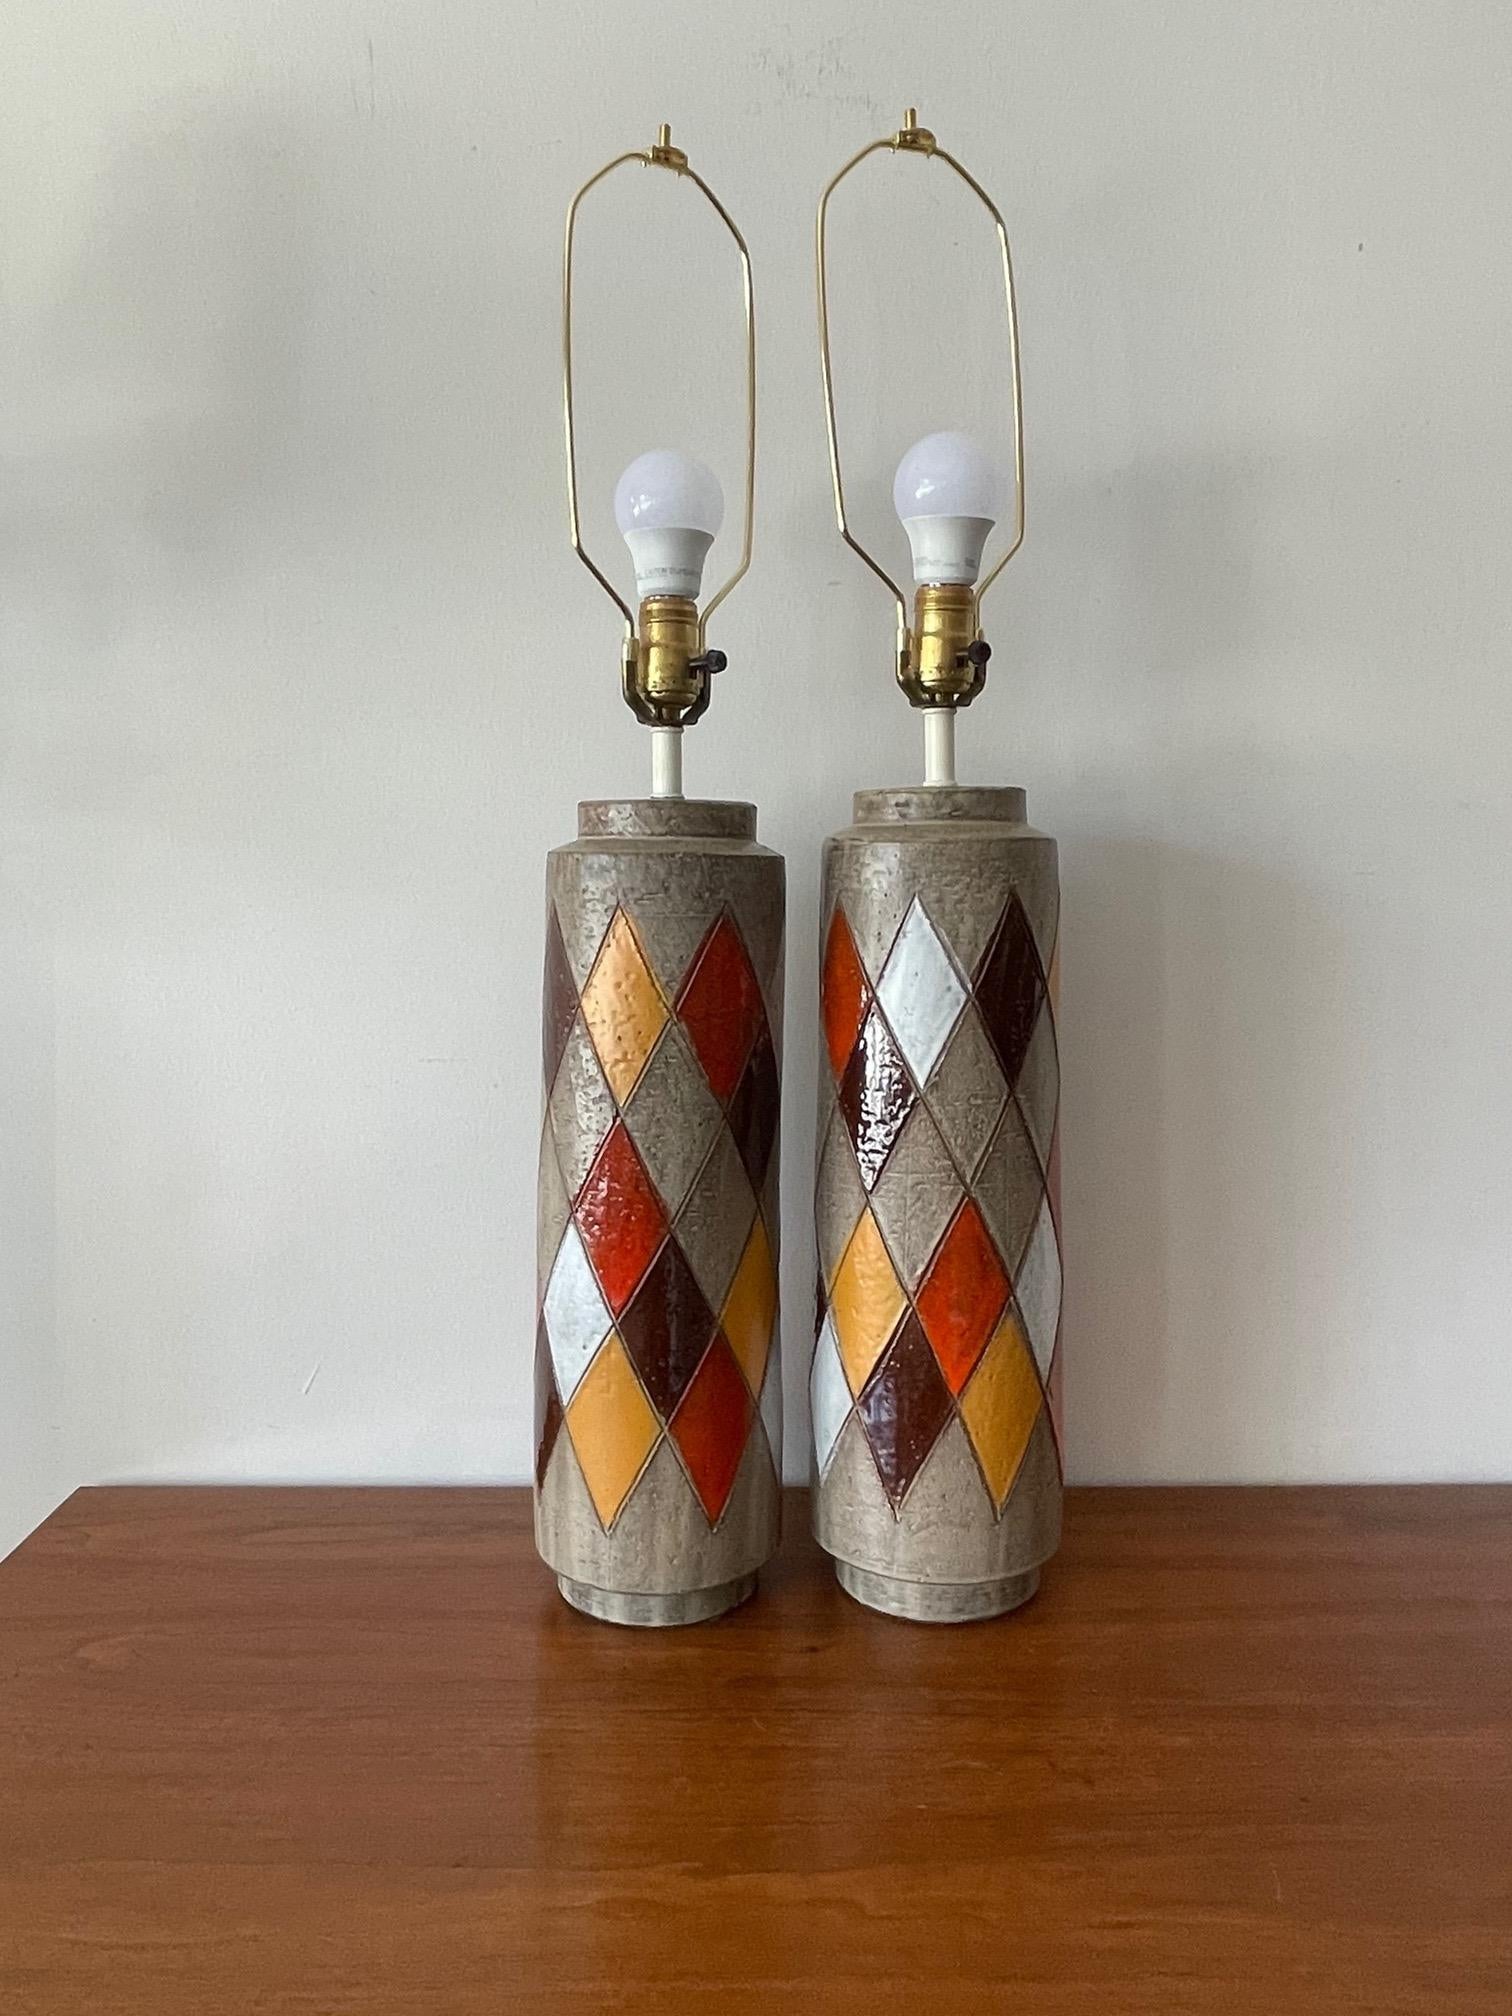 A great pair of Also Londi for Bitossi ceramic lamps with a harlequin pattern decoration. The lamps are large with ceramic bases approx. 17.5